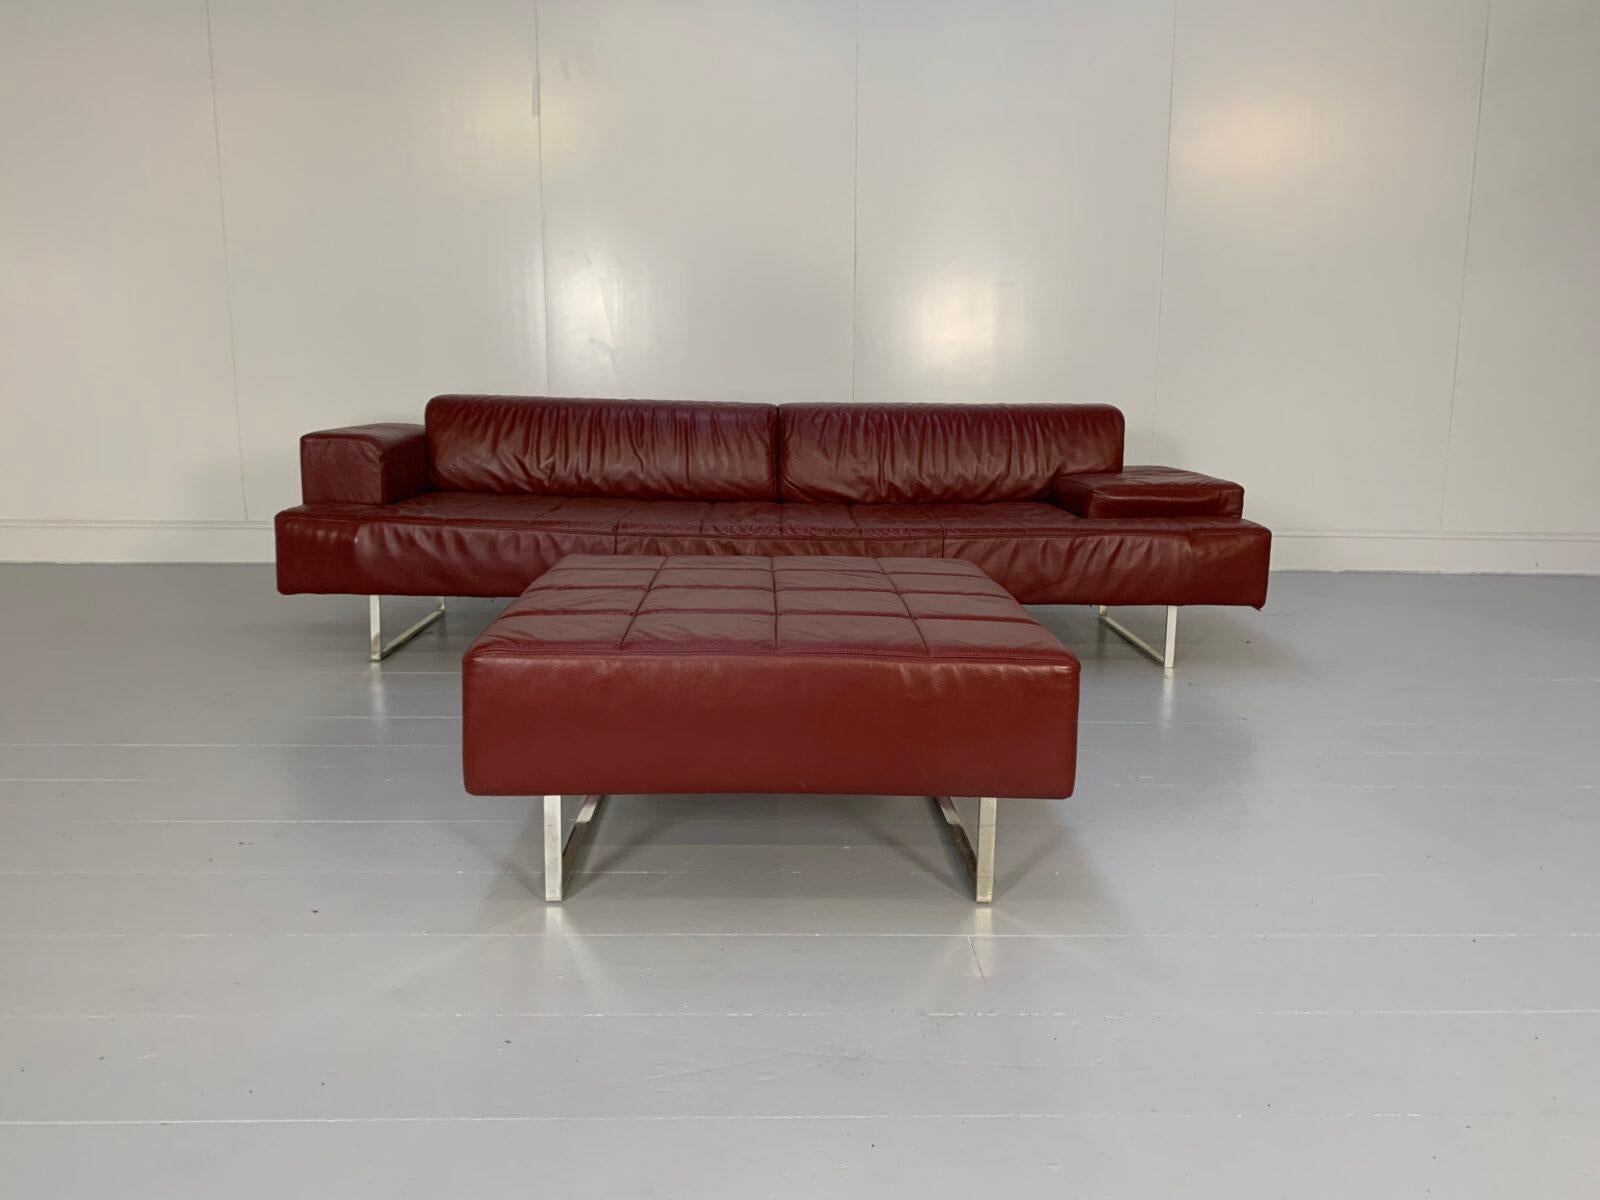 On offer on this occasion is a huge, ultra-rare “Quadra” 4-Sofa and Large Ottoman suite from the world renown Italian furniture house of Poltrona Frau.
As you will no doubt be aware by your interest in this Pierluigi Cerri masterpiece, Poltrona Frau